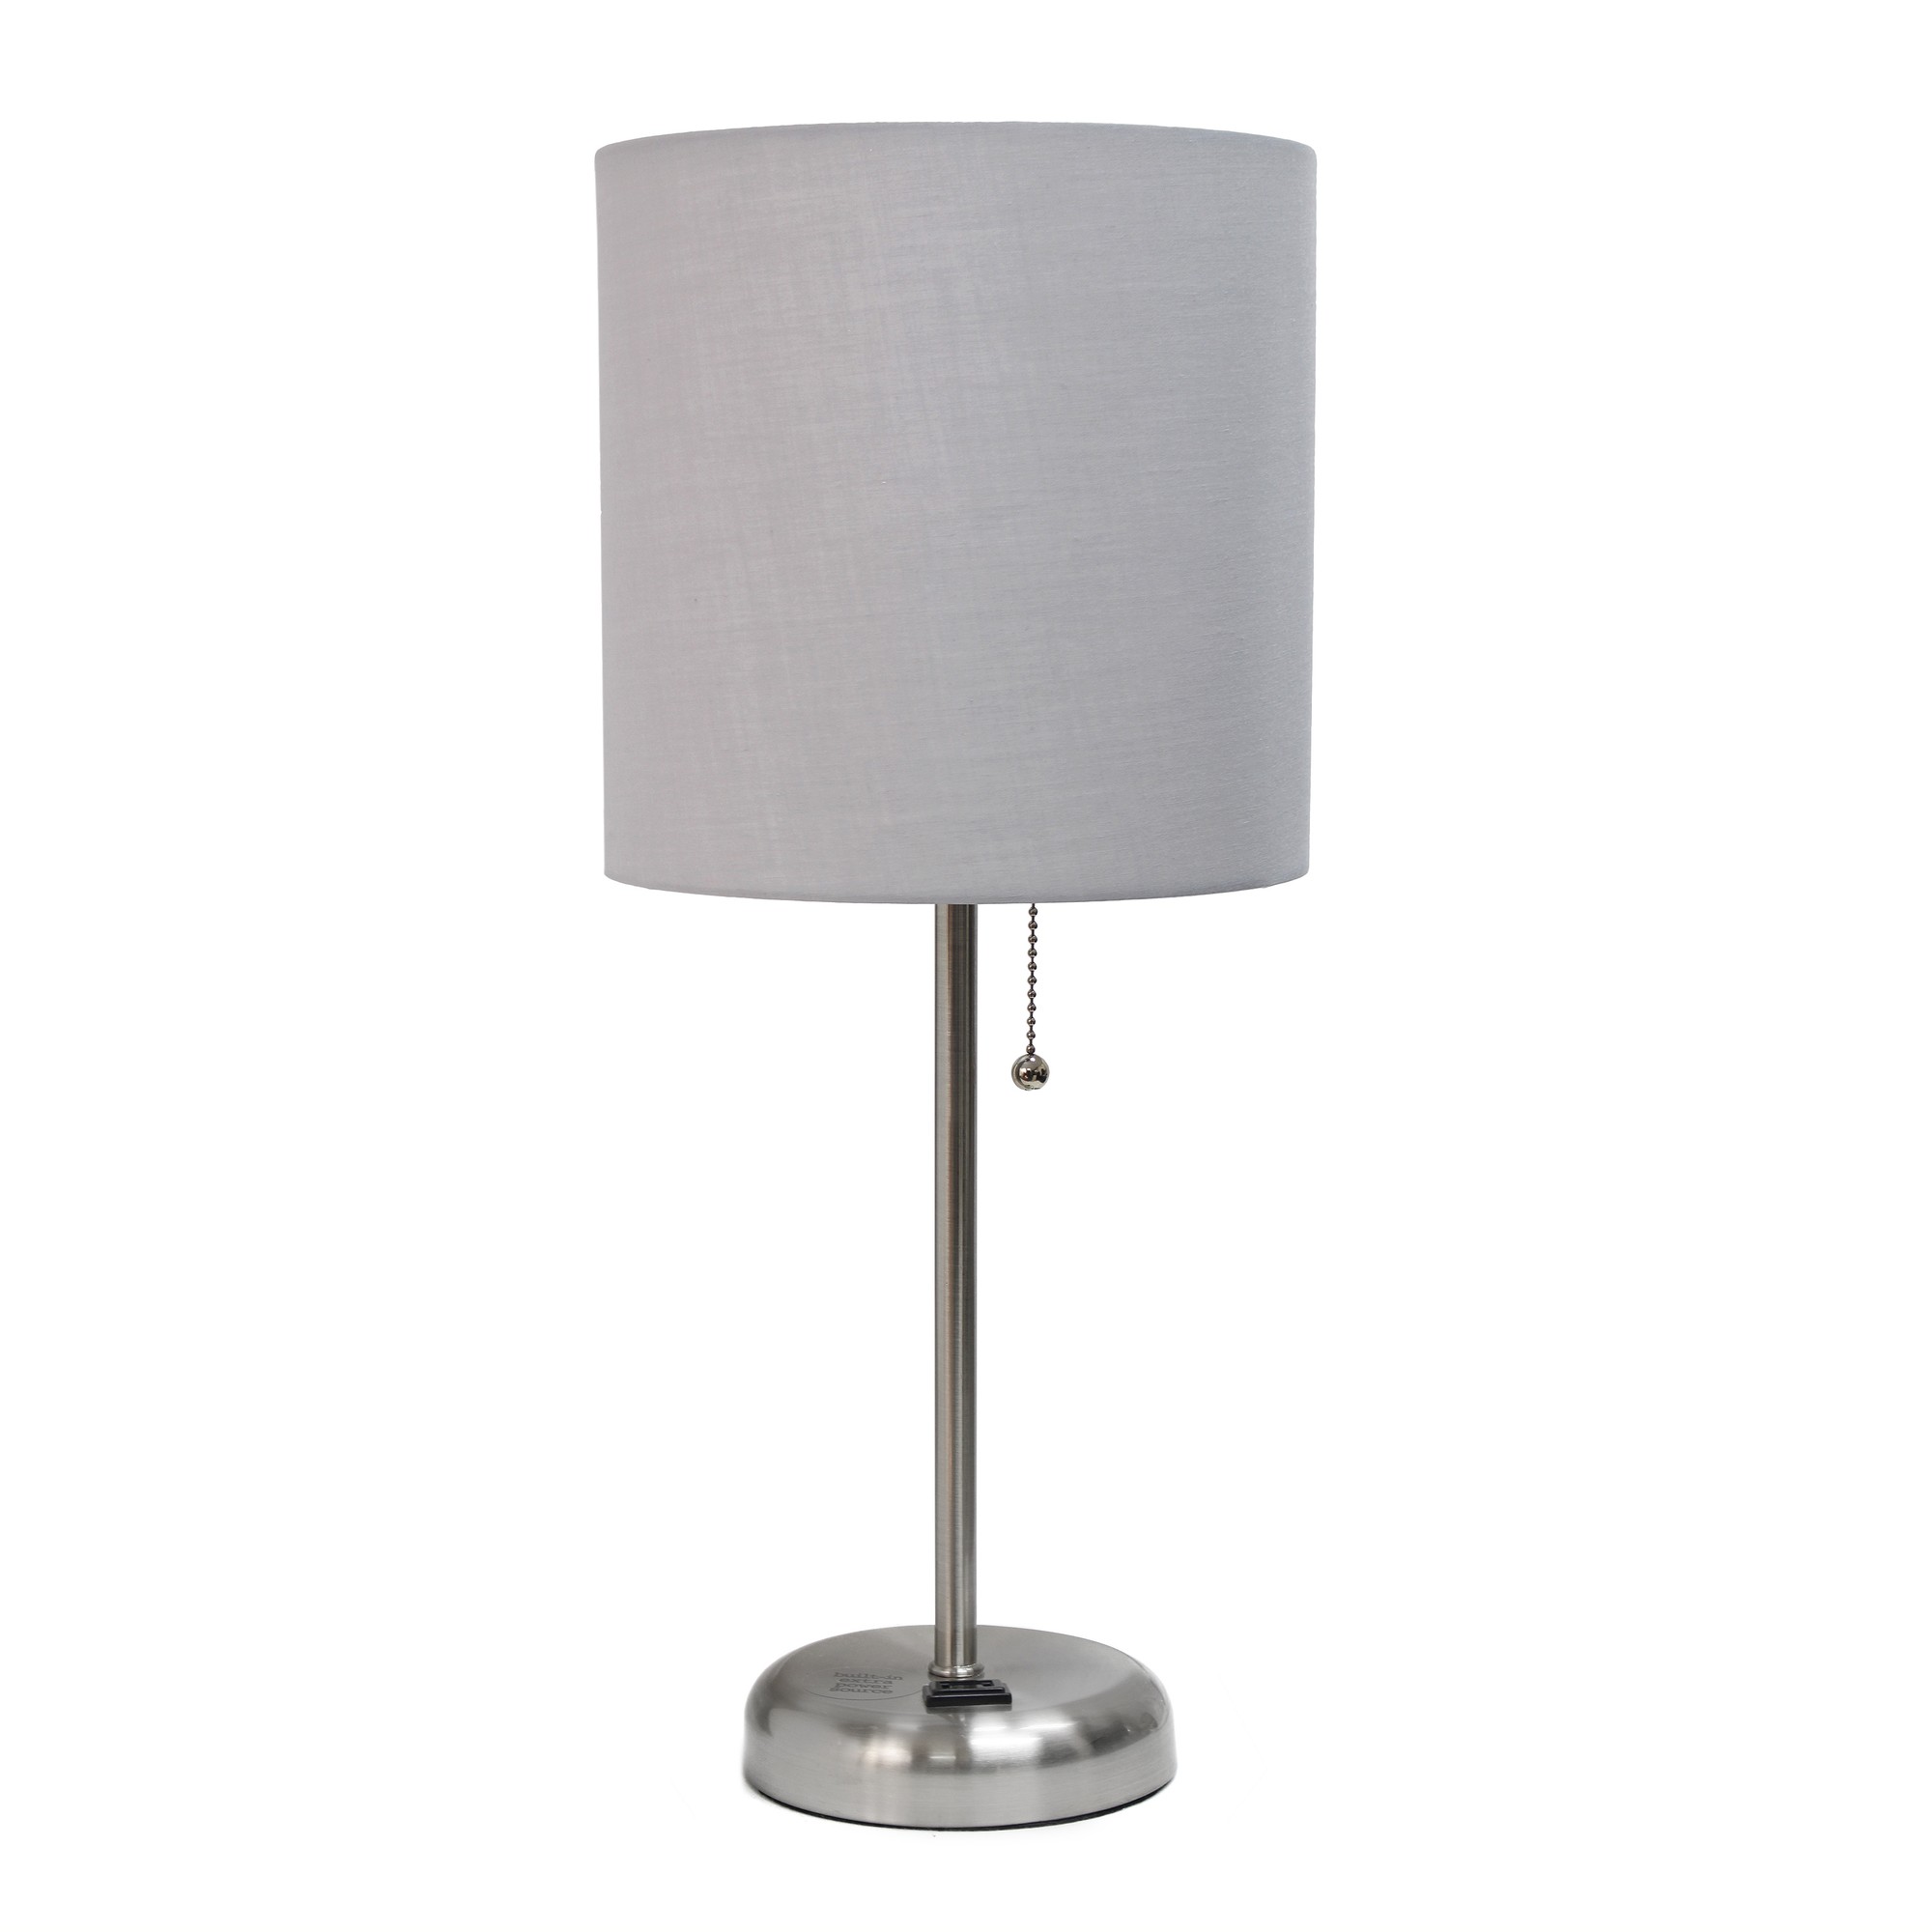 Simple Designs Stick Lamp with Charging Outlet and Fabric Shade, Grey